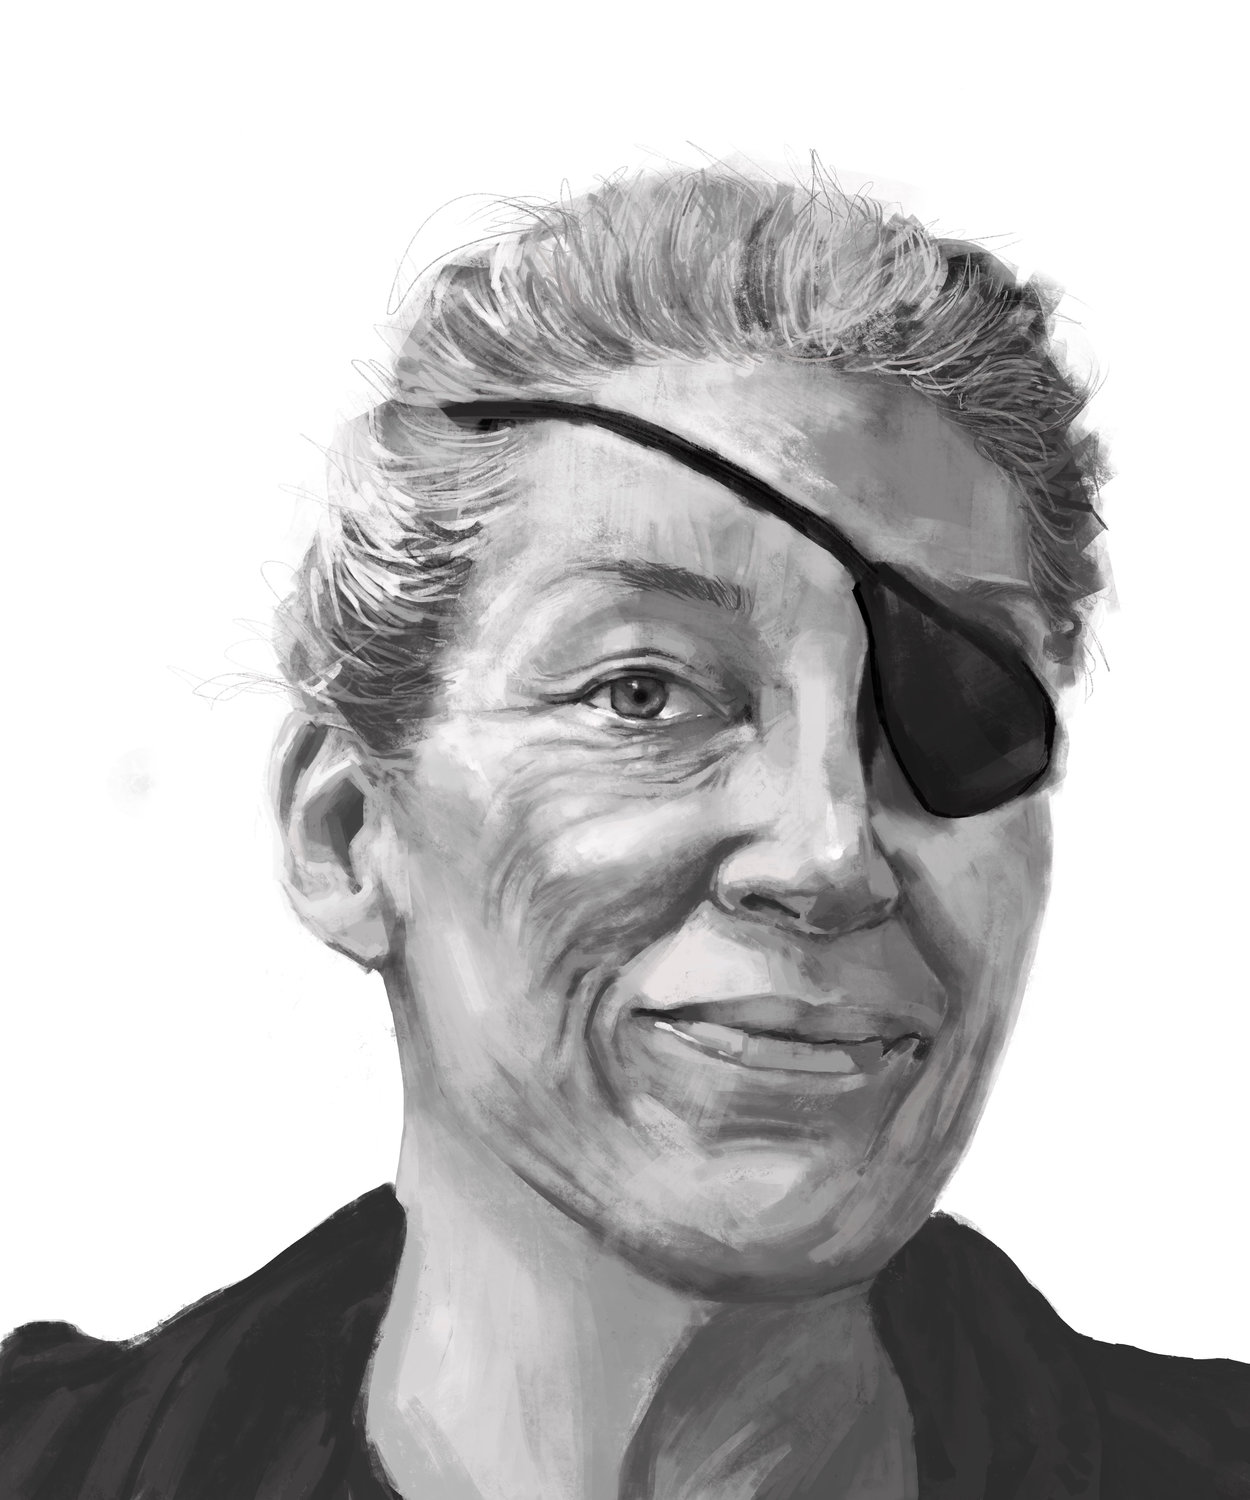 When Tina Tang created a portrait of  Marie Colvin, she focused on what was perhaps her most distinguishing physical identifier, the eyepatch she wore.